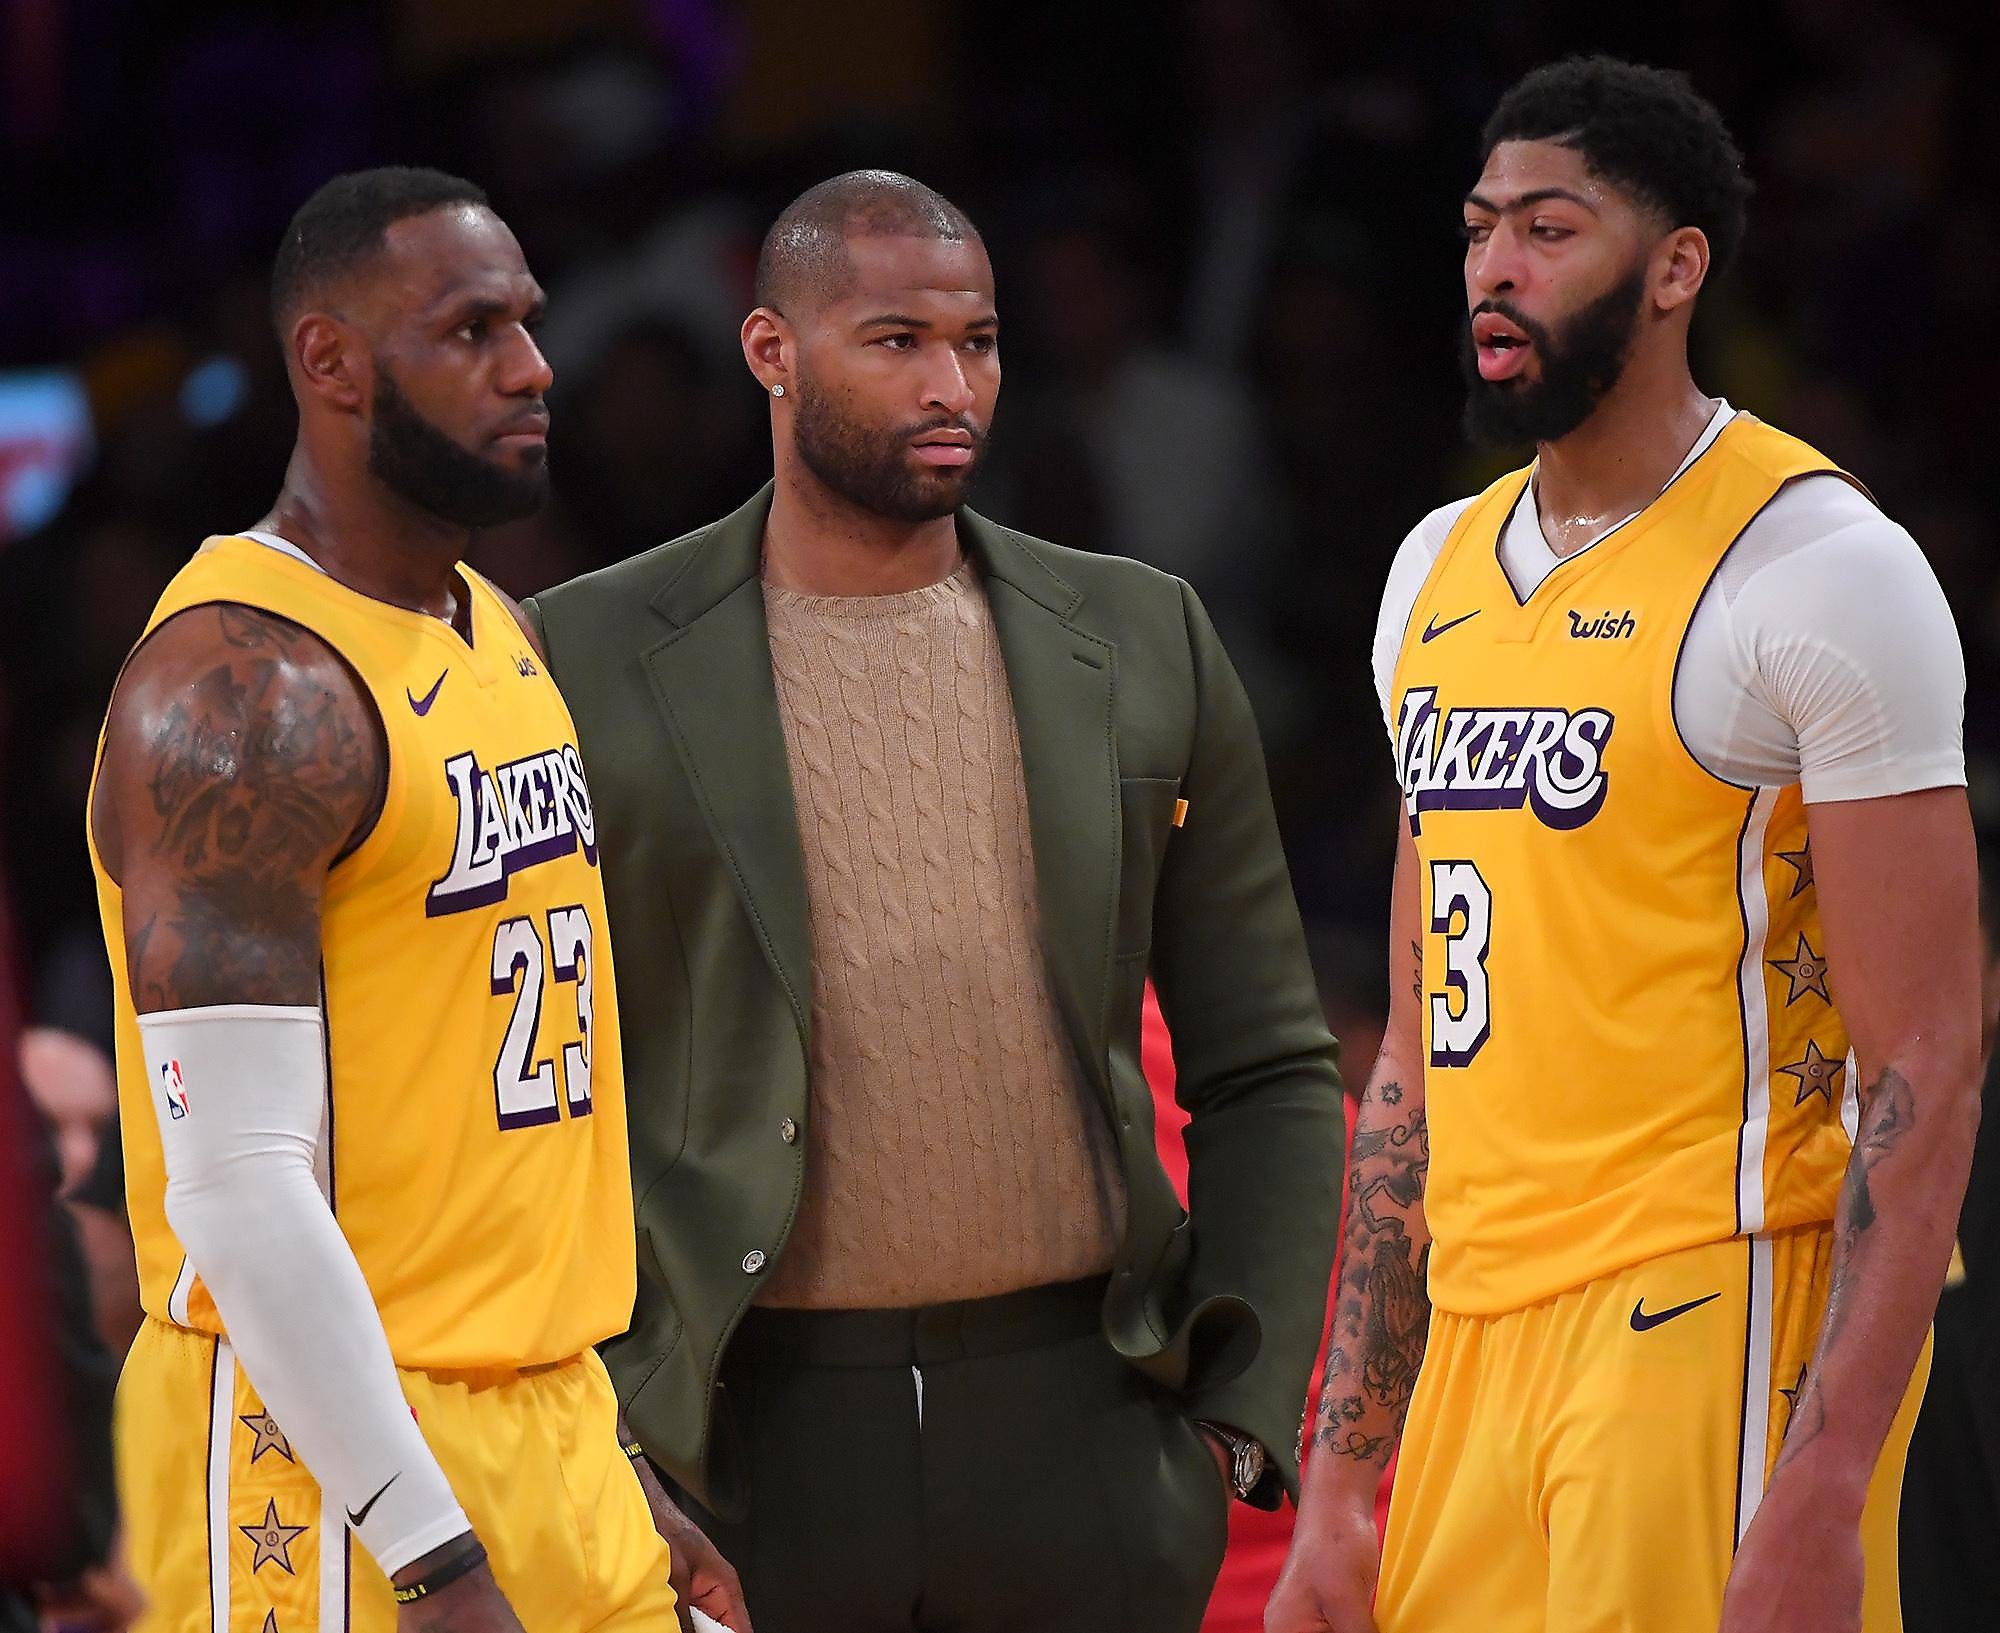 DeMarcus Cousins, Markieff Morris get heated, then ejected in NBA game